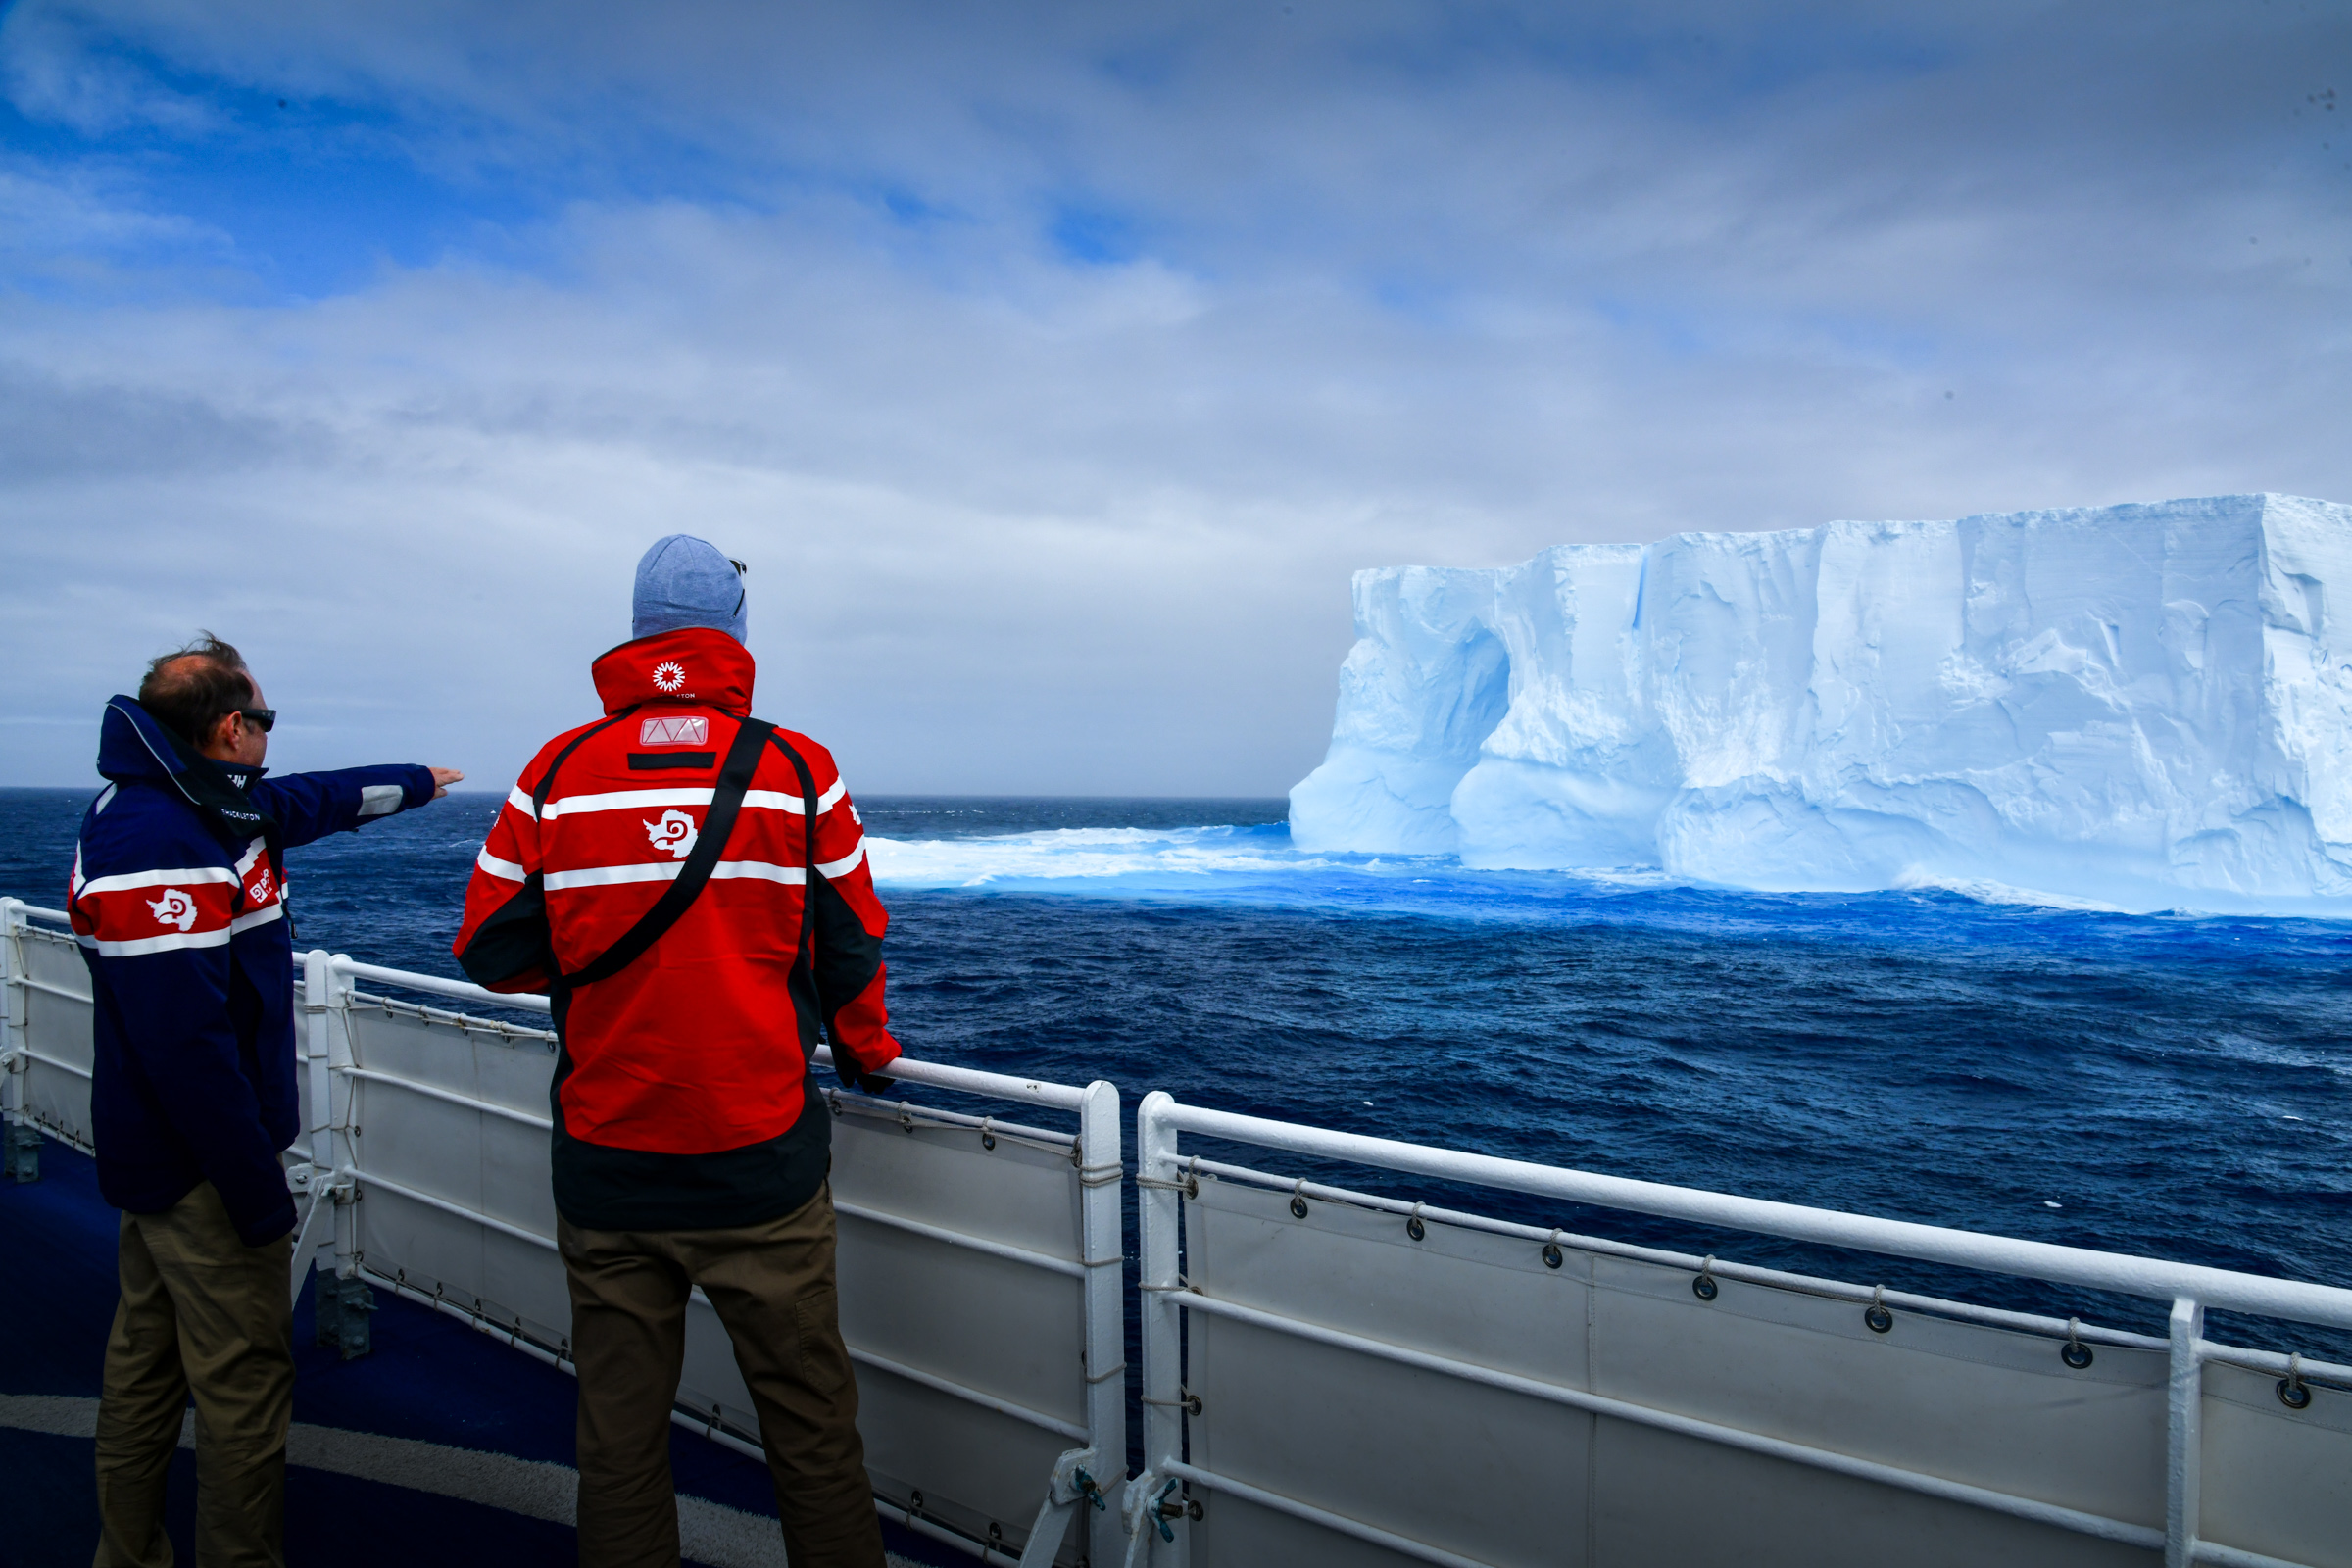 taking in the Antarctic views from the deck of the Seaventure